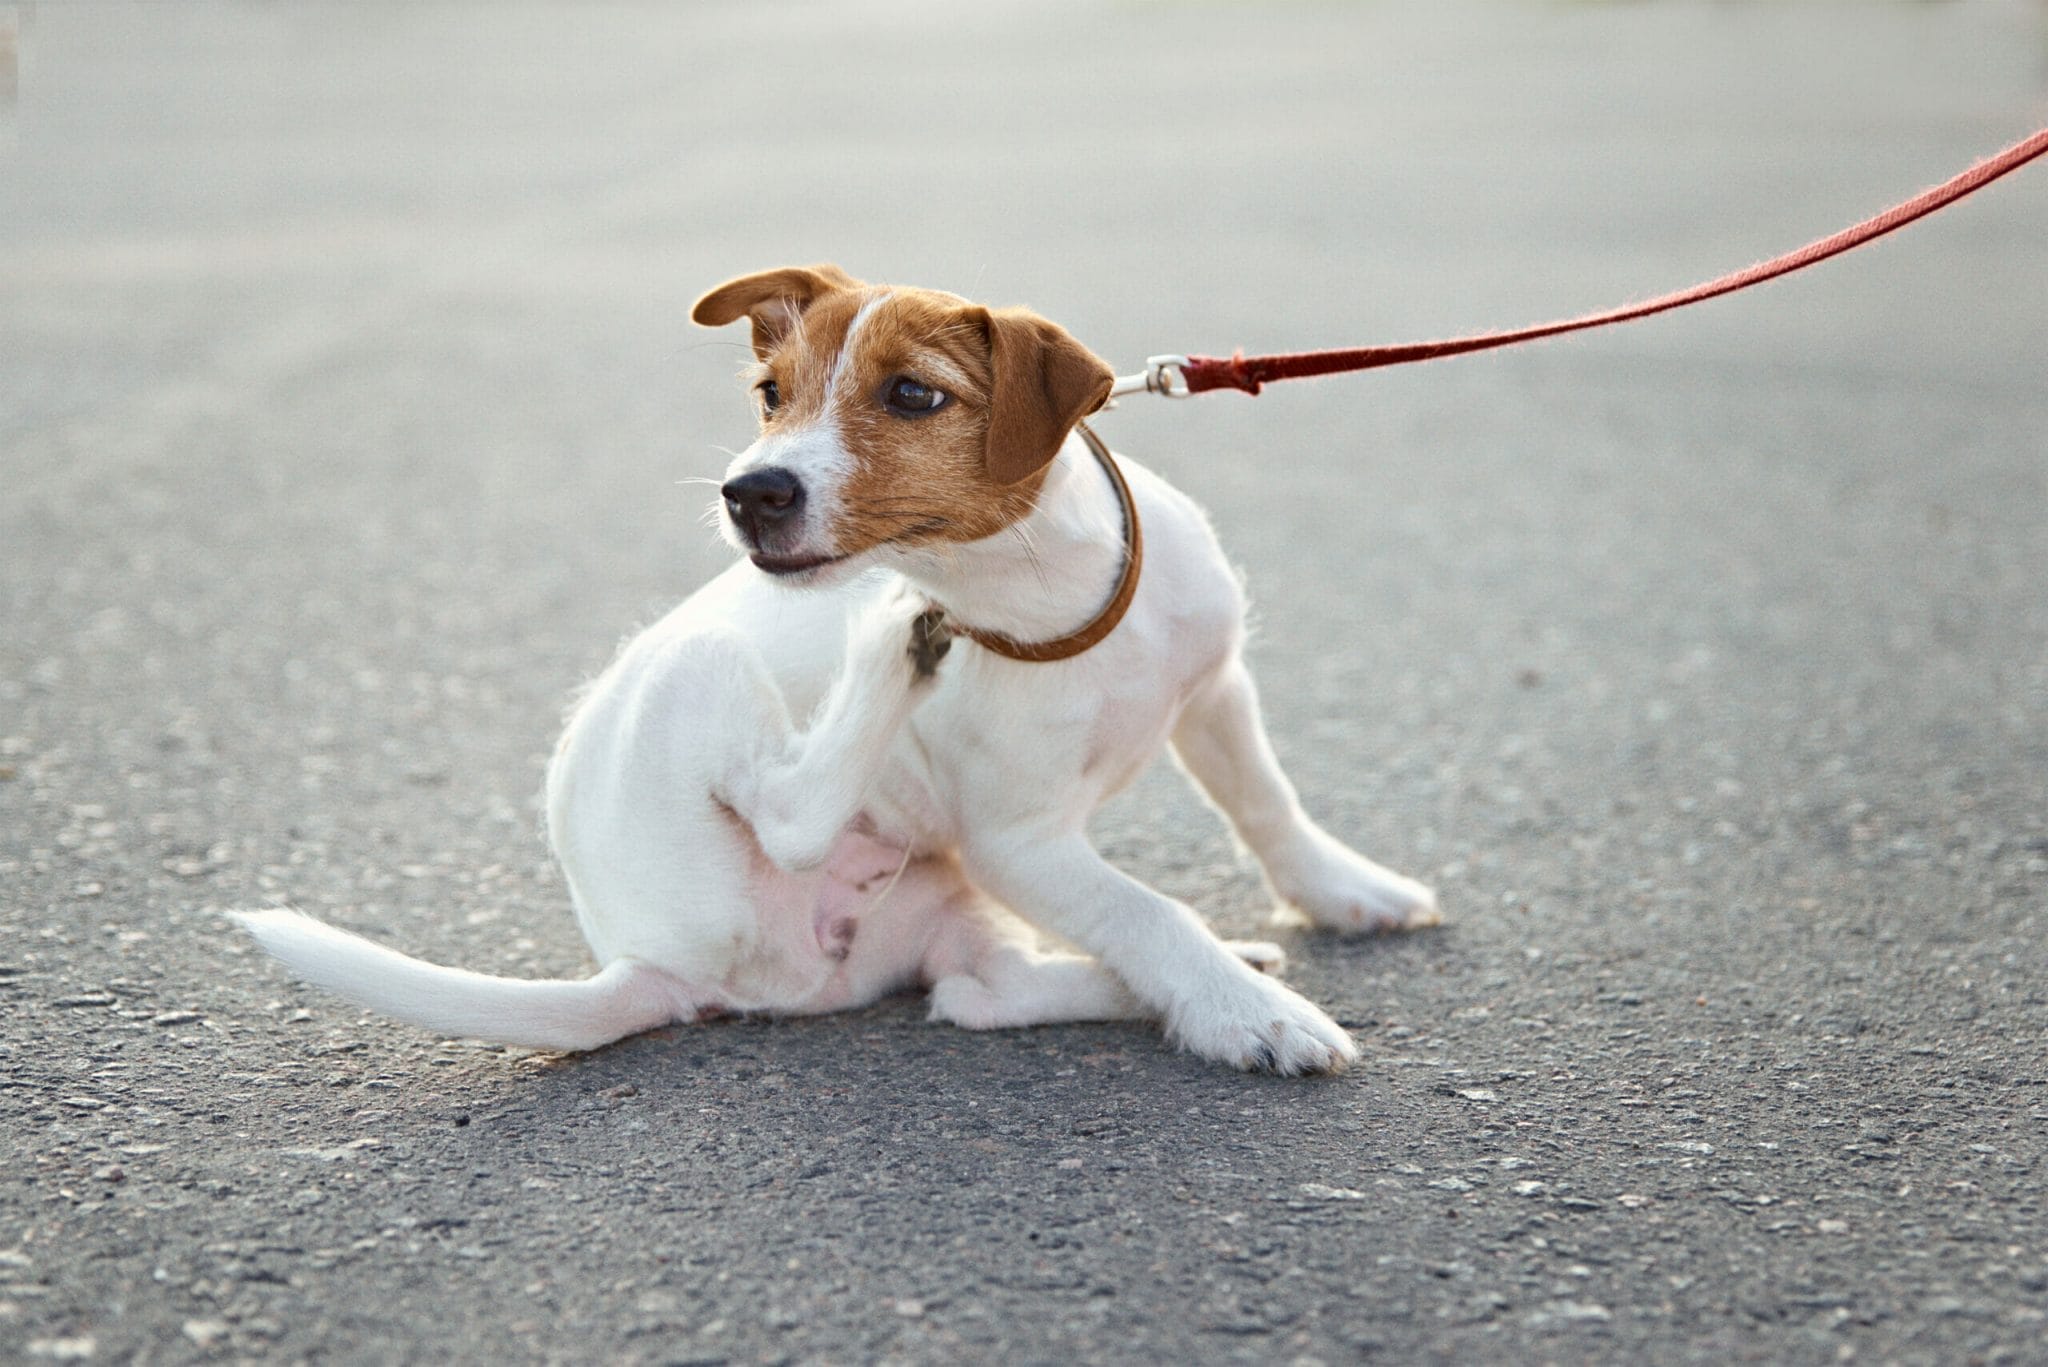 What are some tips for keeping your dog flea-free?